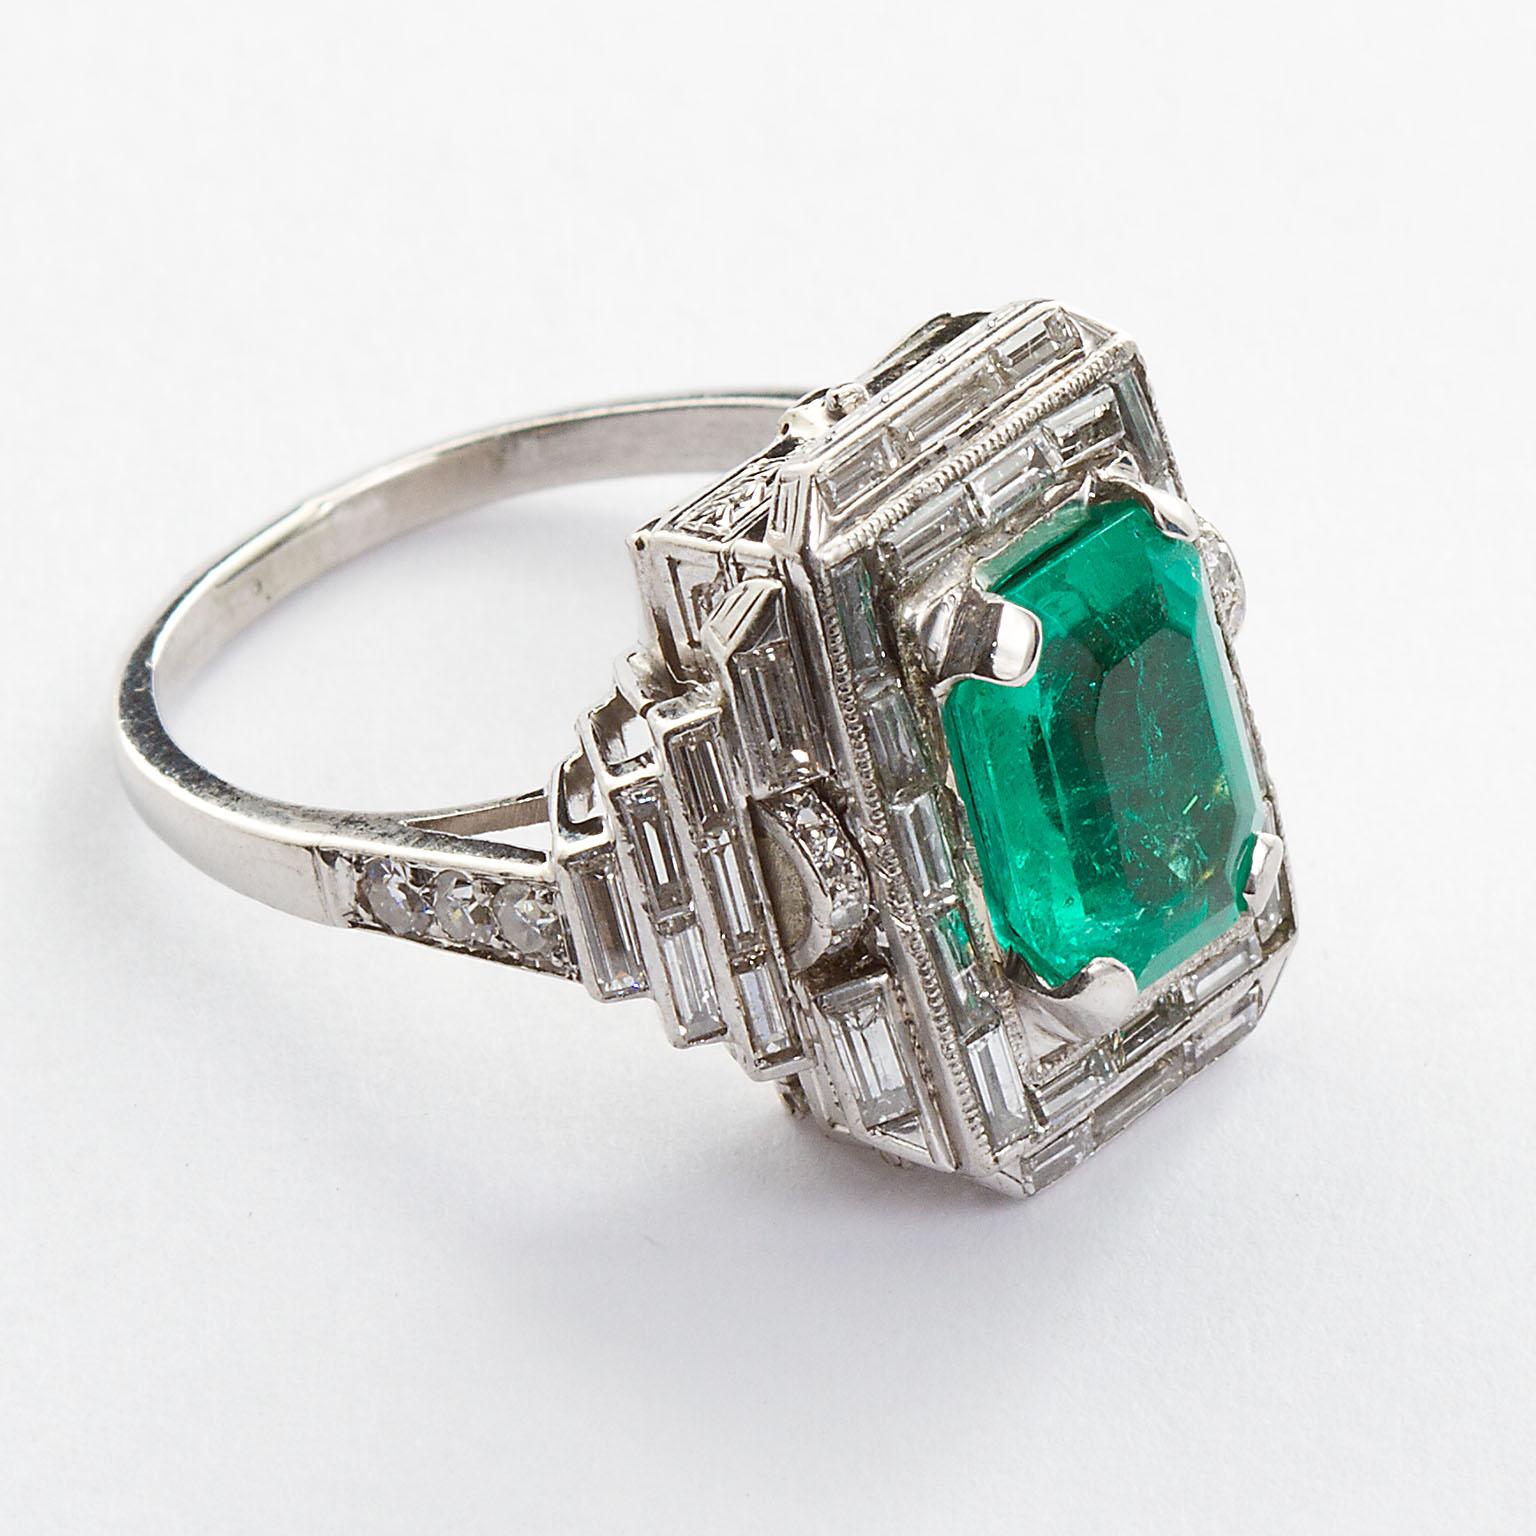 An Art Deco inspired platinum vintage ring set with an approx. 4.00 carat octagon emerald and set with surrounding baguette cut diamonds. Ring size 7 (can be resized down to 4).

No. TMWJ-8318